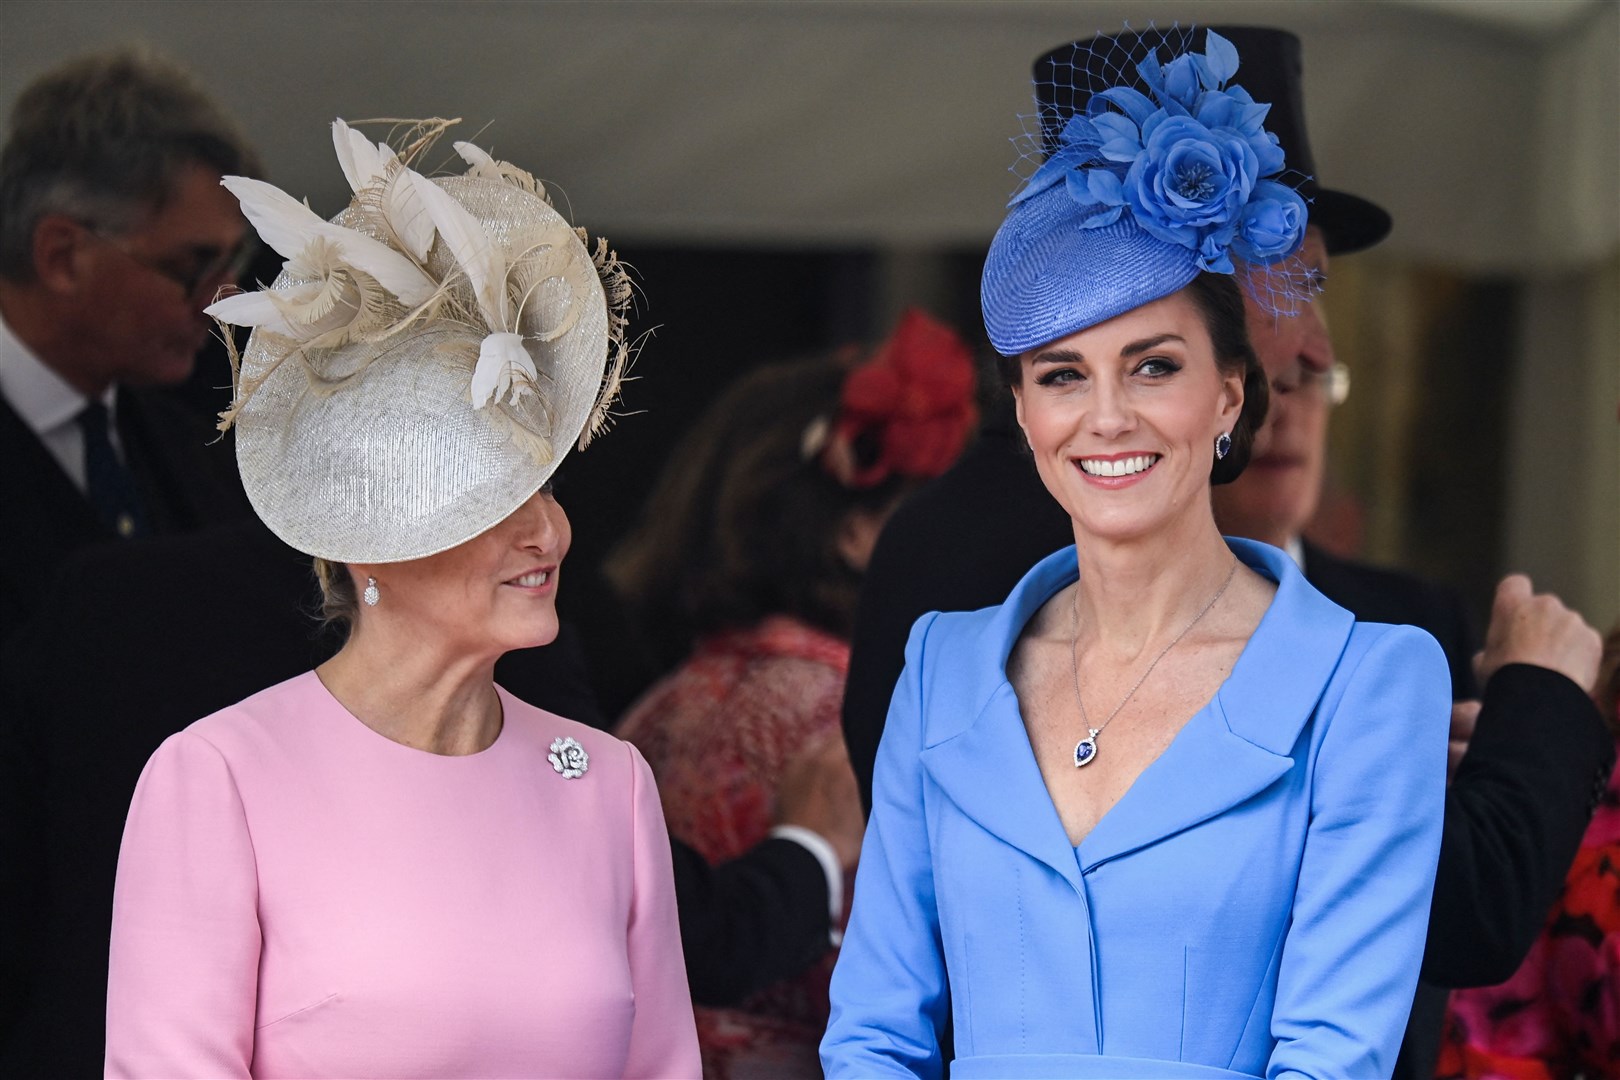 Duchess of Cambridge (right) and the Countess of Wessex arriving for the annual Order of the Garter Service at St George’s Chapel, Windsor Castle (Toby Melville/PA)